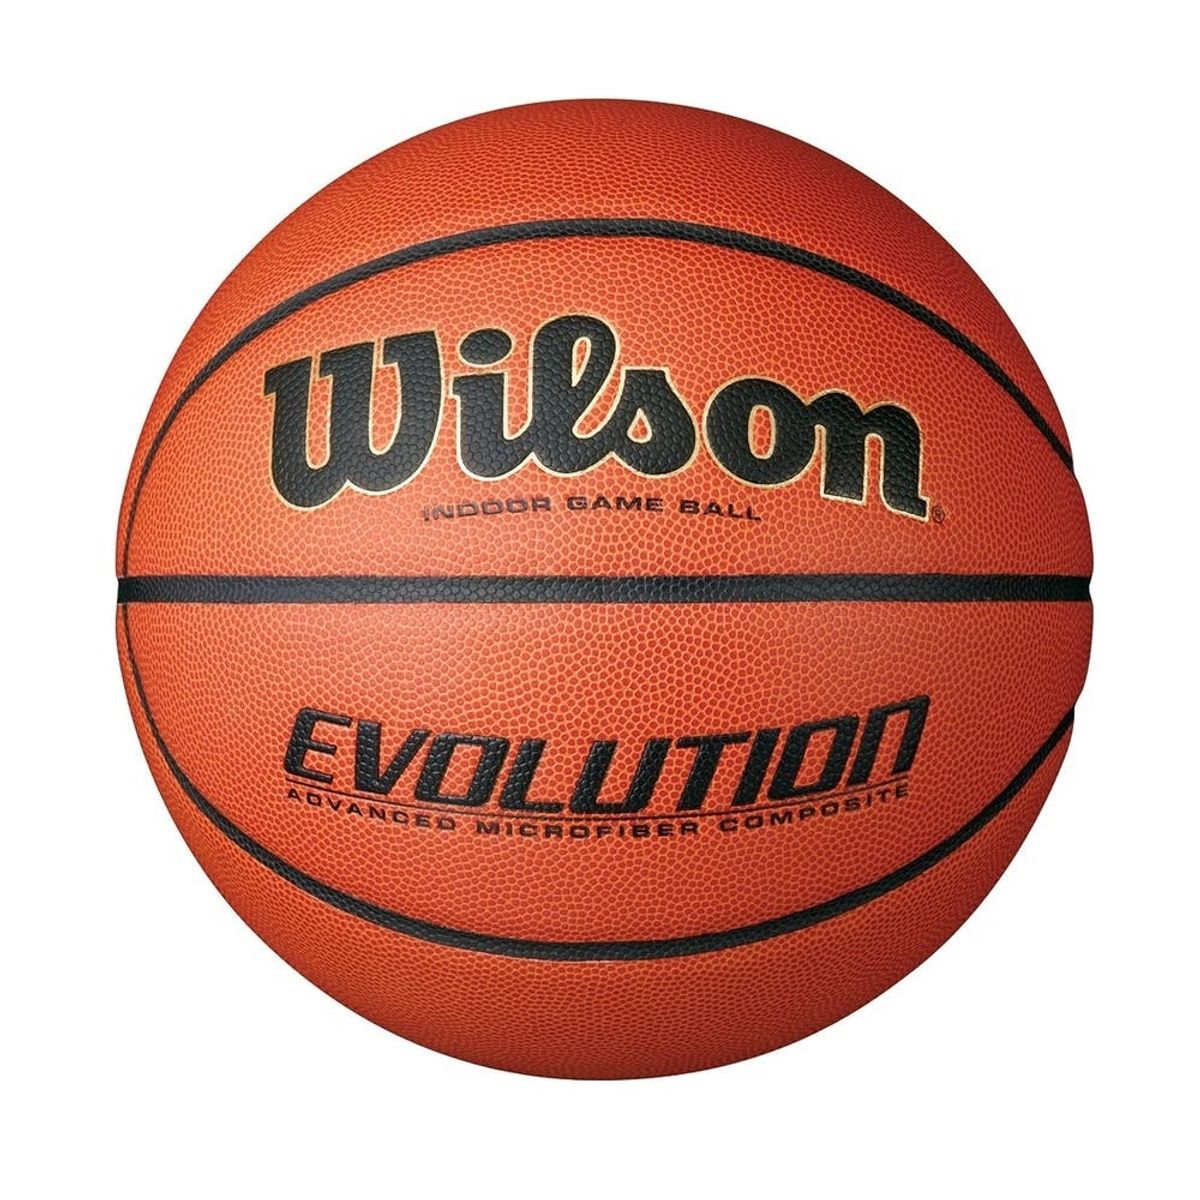 Wilson’s New Basketball Connects to Your Phone to Help Improve Your Game